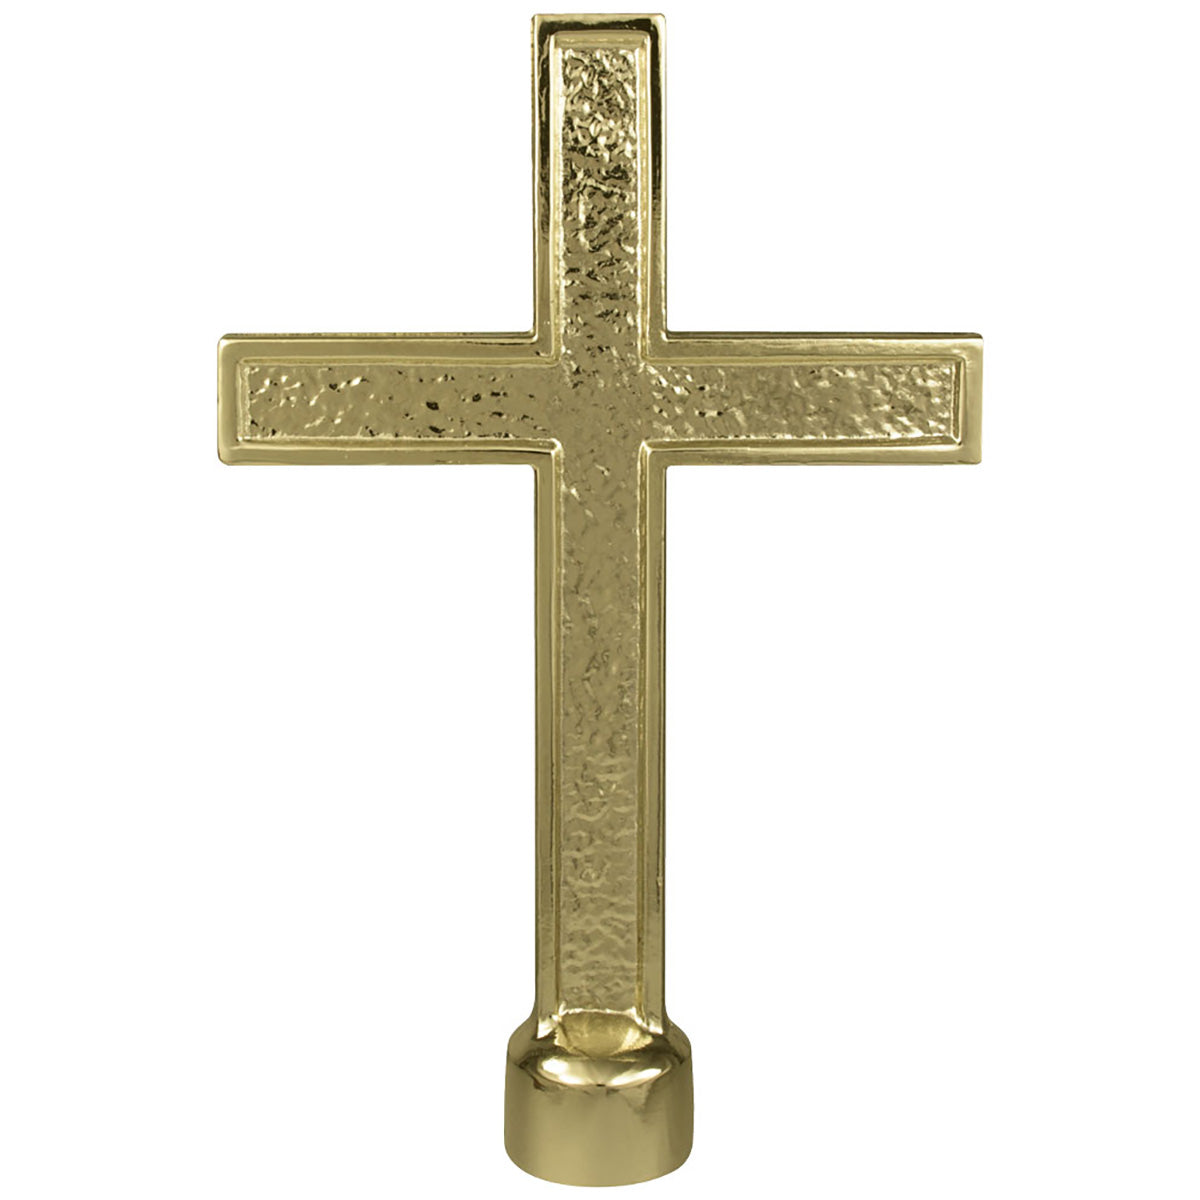 Gold Metal Passion Cross With Ferrule For Indoor Oak Poles